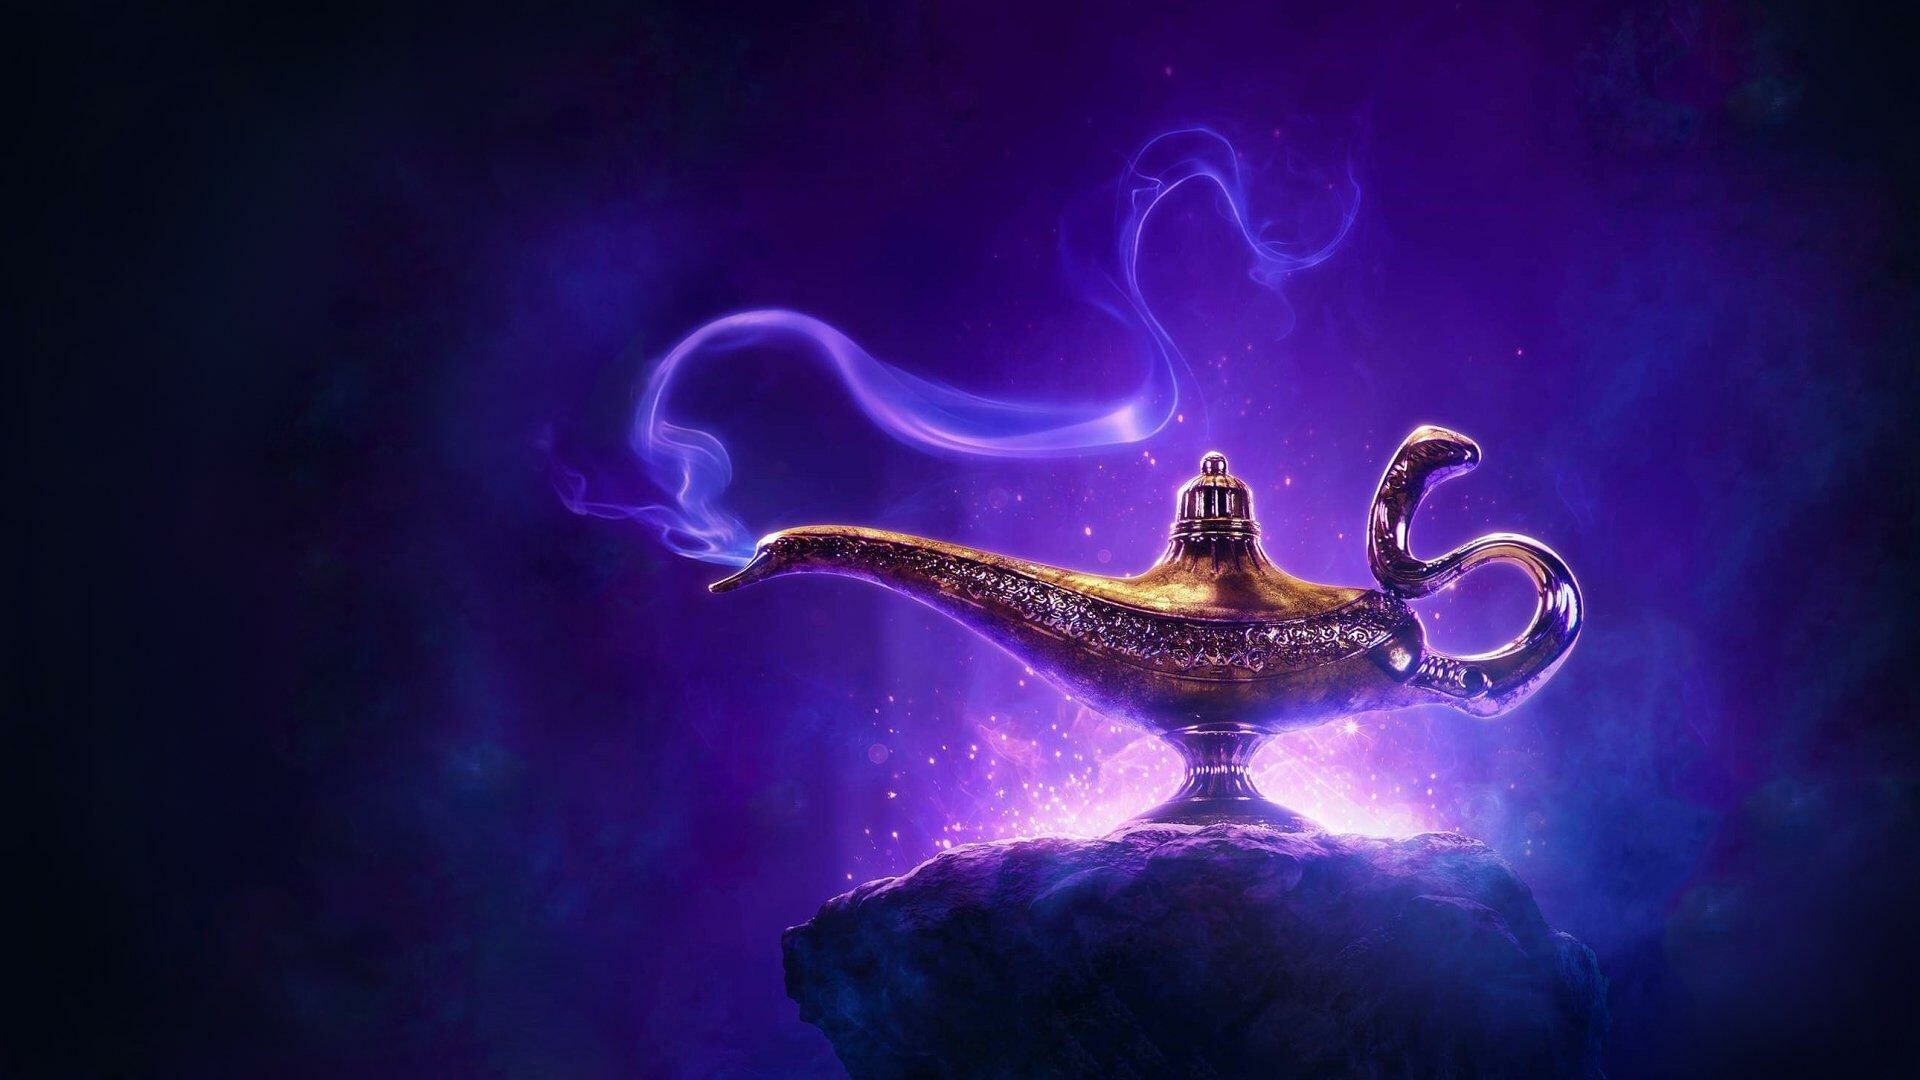 Aladdin (Cartoon): The 31st entry into the Disney Animated Canon. 1920x1080 Full HD Background.